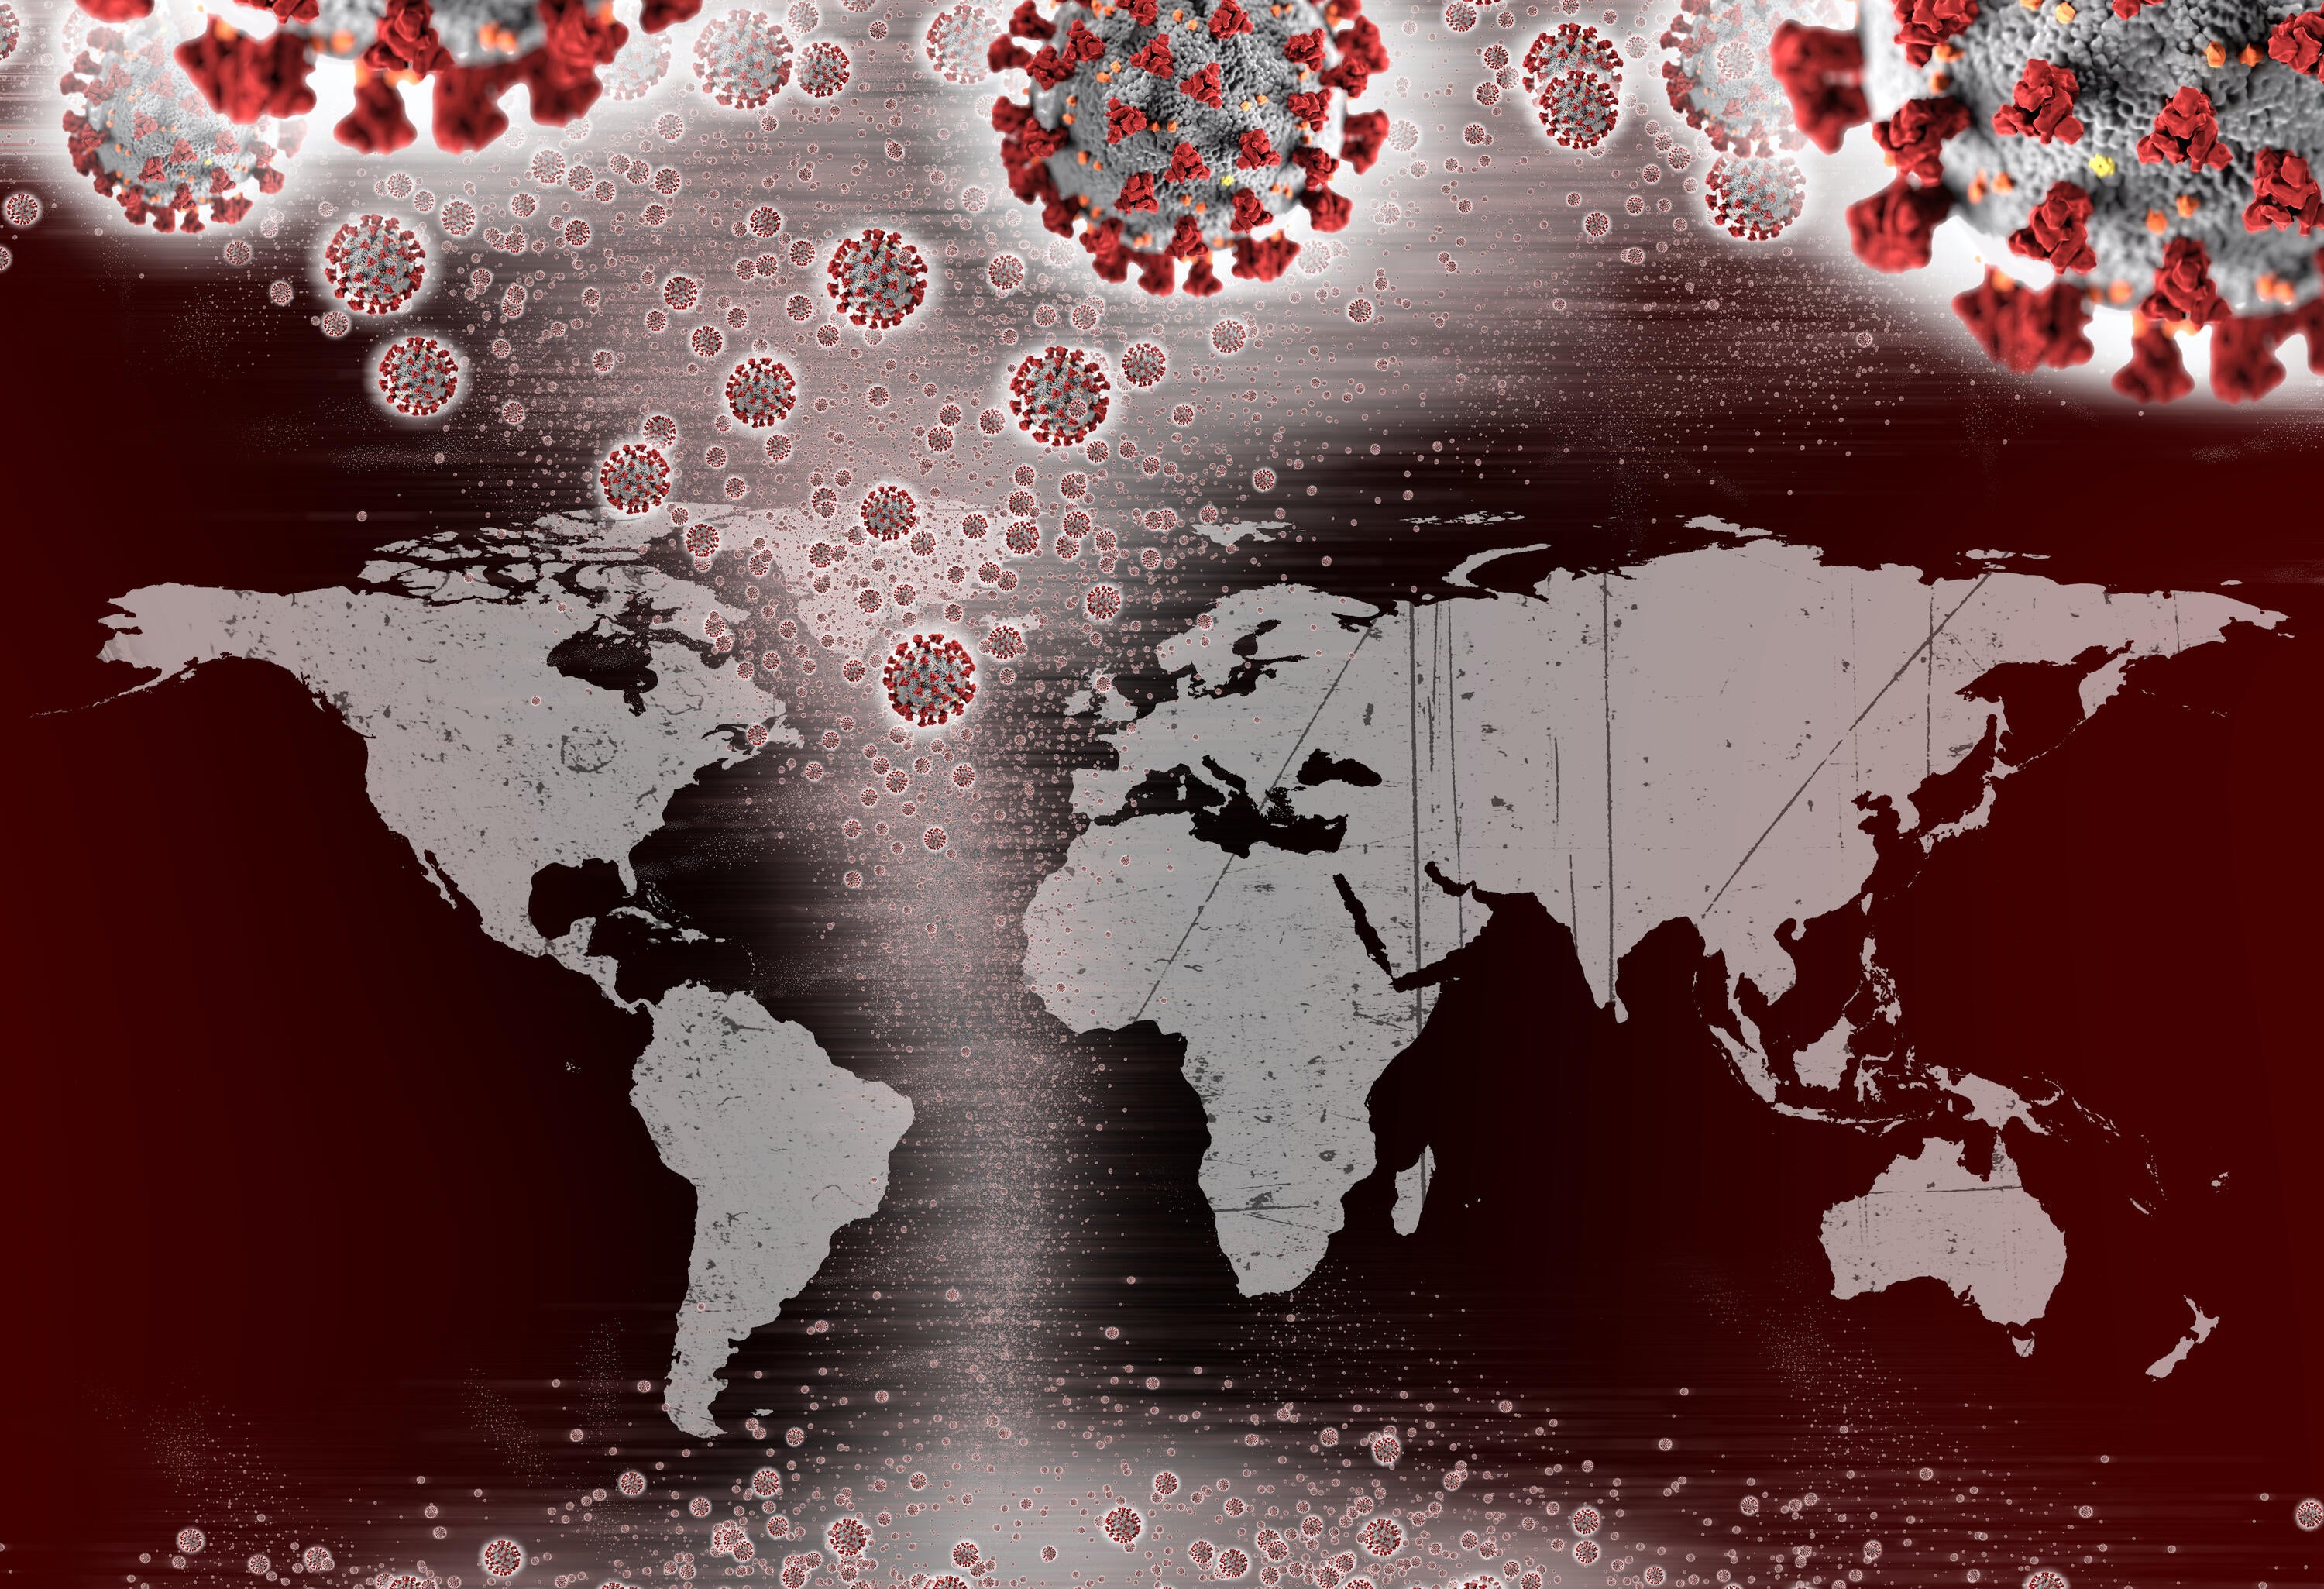 Map of the world with COVID-19 virus particles overlayed